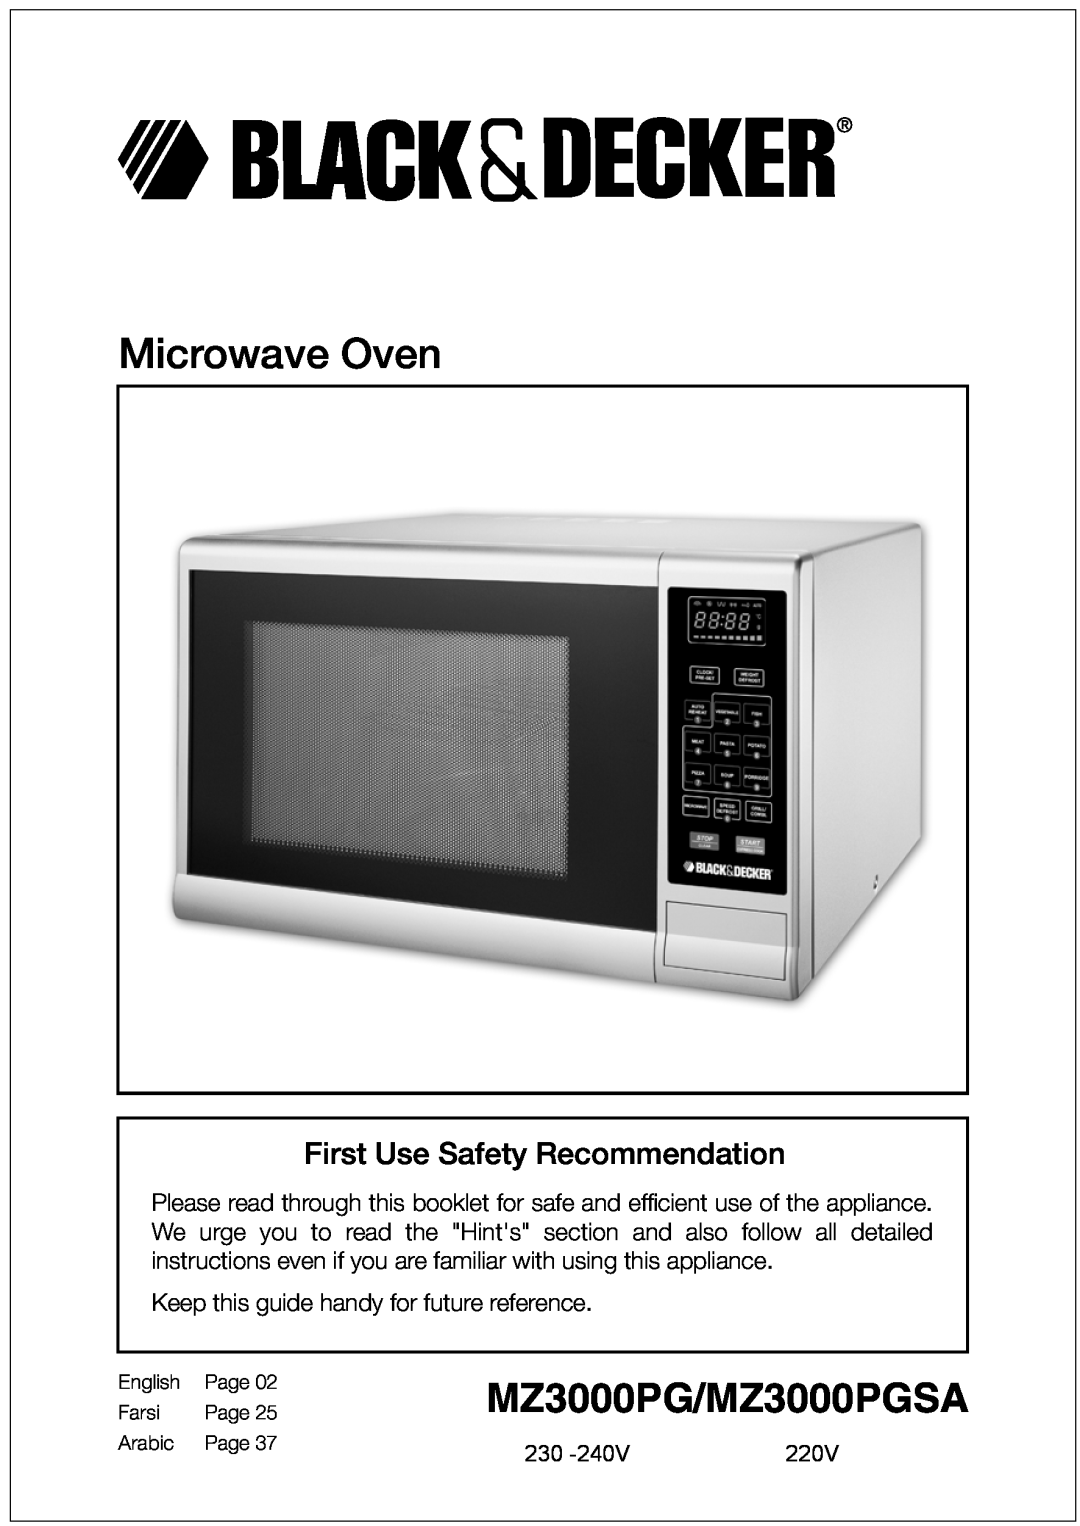 Black & Decker manual Microwave Oven, MZ3000PG/MZ3000PGSA, First Use Safety Recommendation 